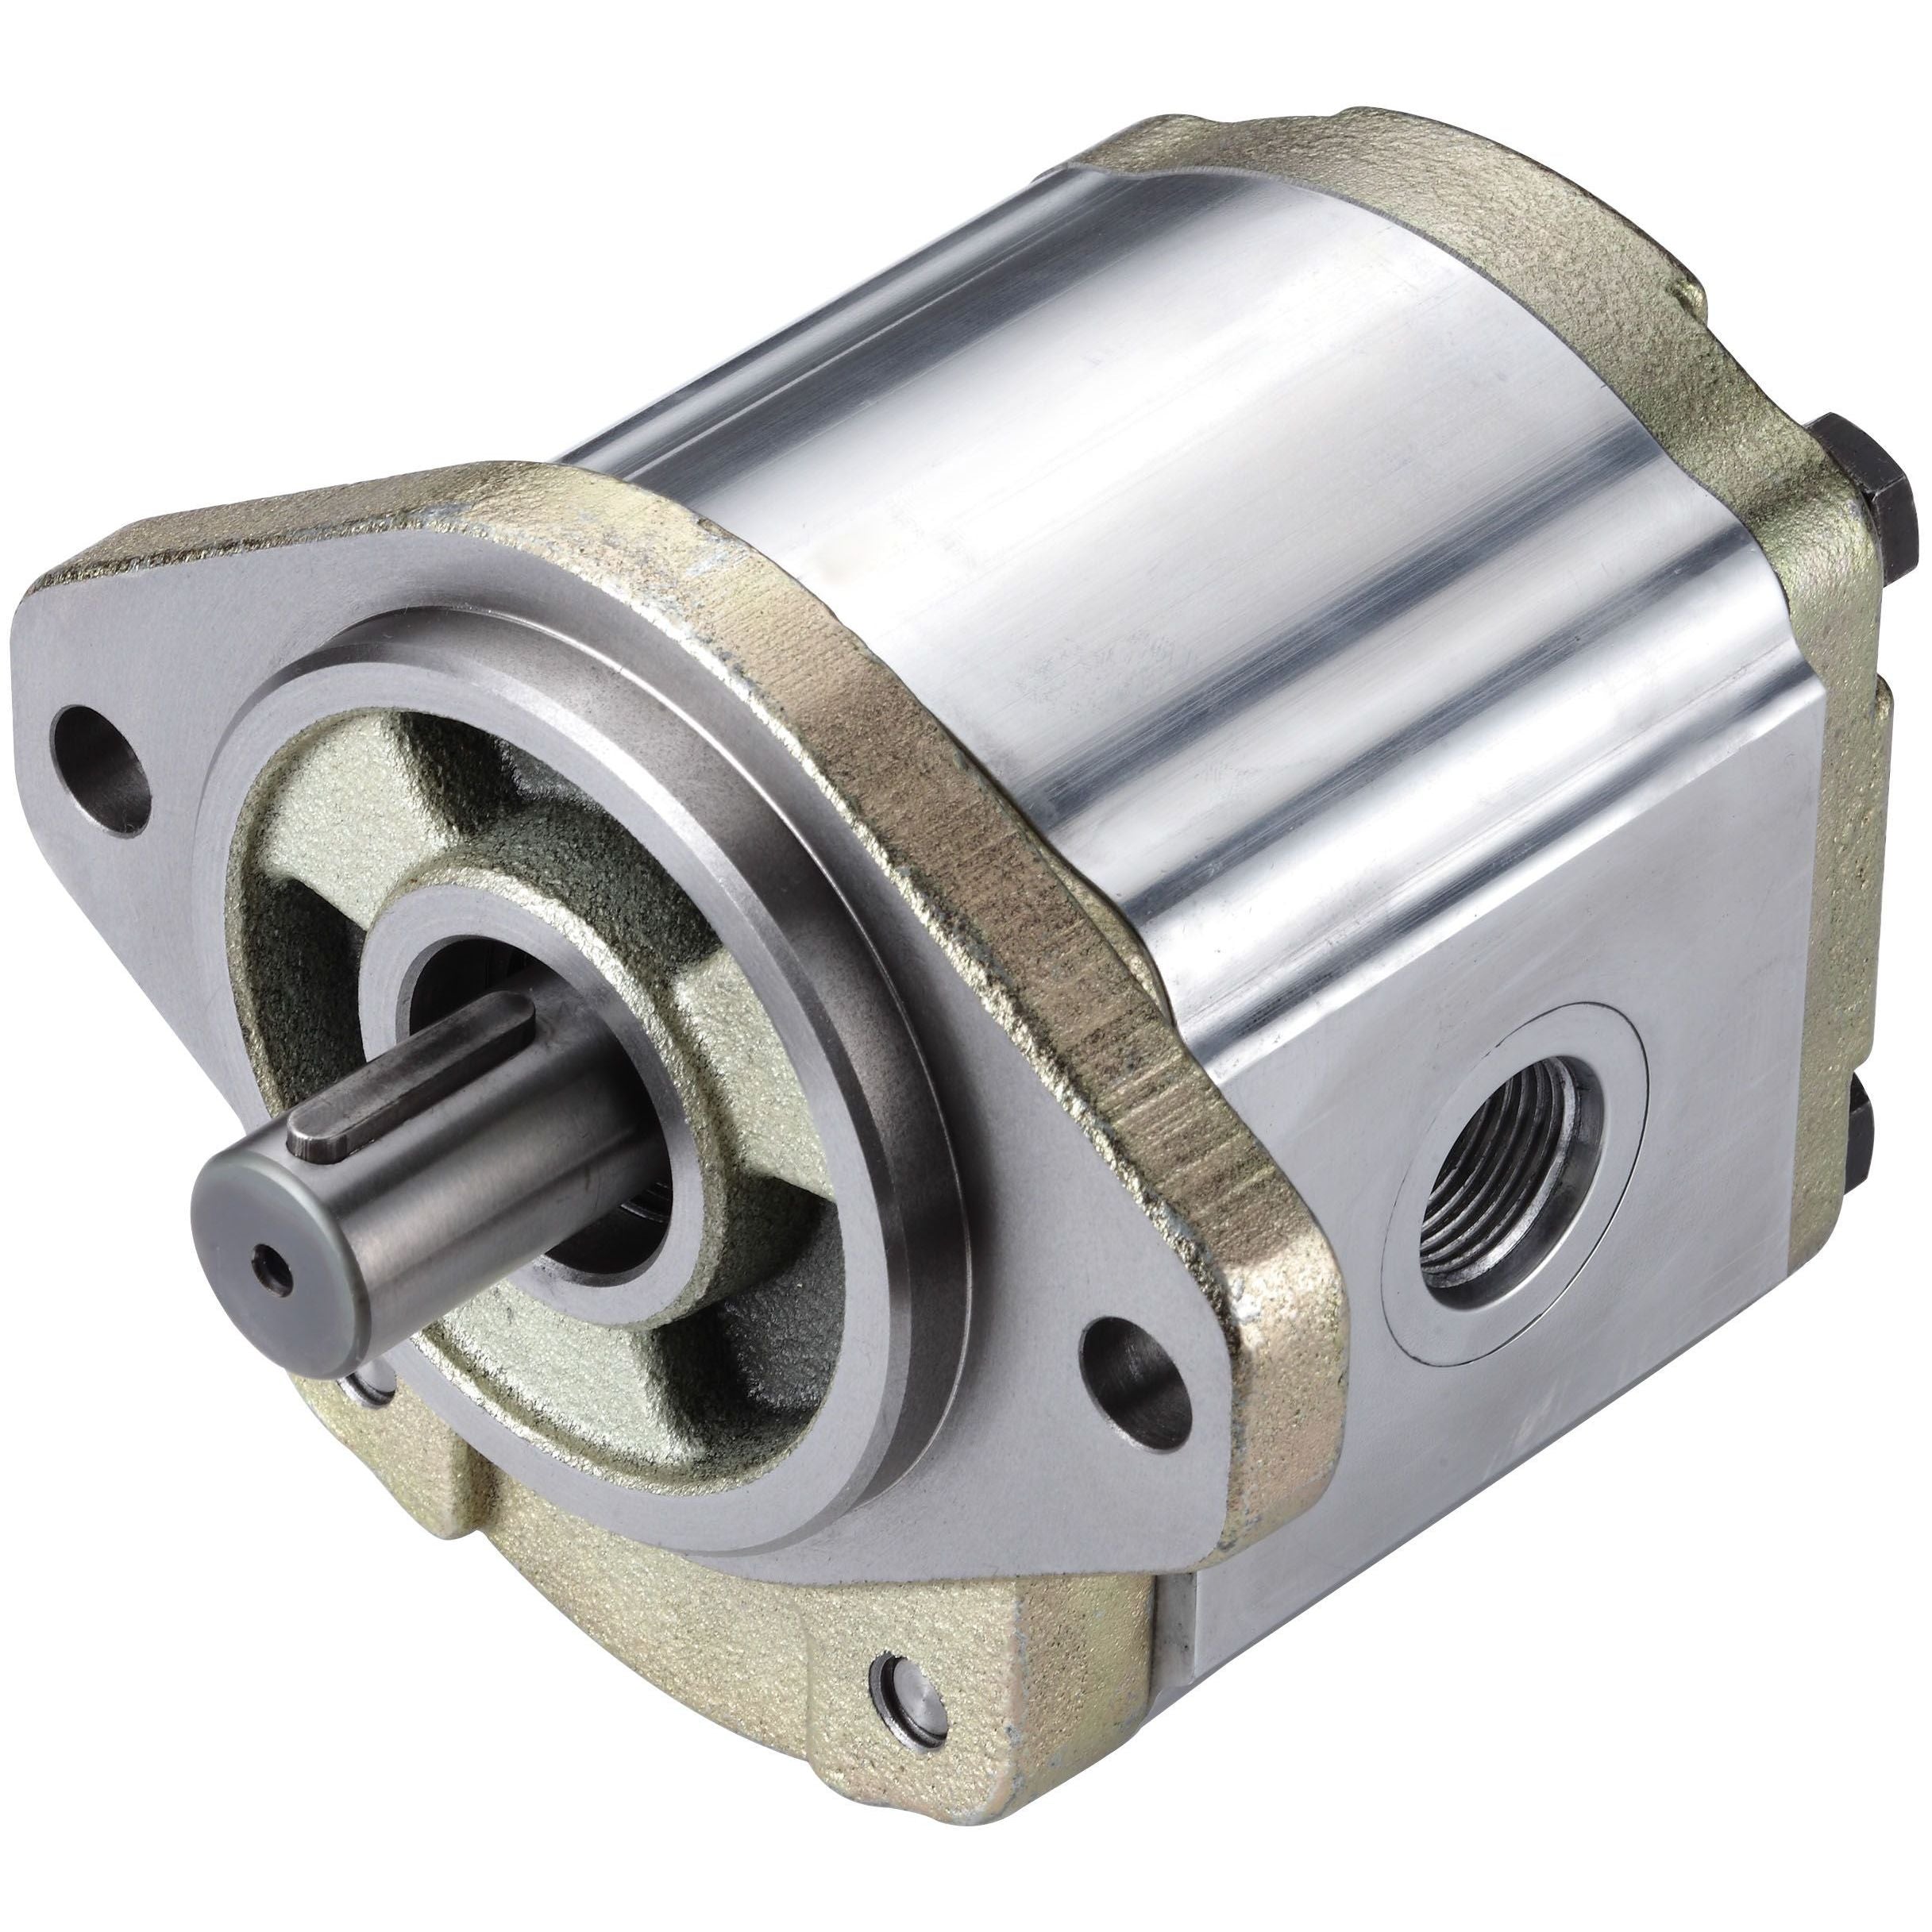 3GB8ZU333L : Honor Gear Pump, CCW Rotation, 33cc (2.01in3), 15.69 GPM, 3500psi, 3000 RPM, #20 SAE (1.25") In, #16 SAE (1") Out, Splined Shaft 13-Tooth, 16/32 Pitch, SAE B 2-Bolt Mount